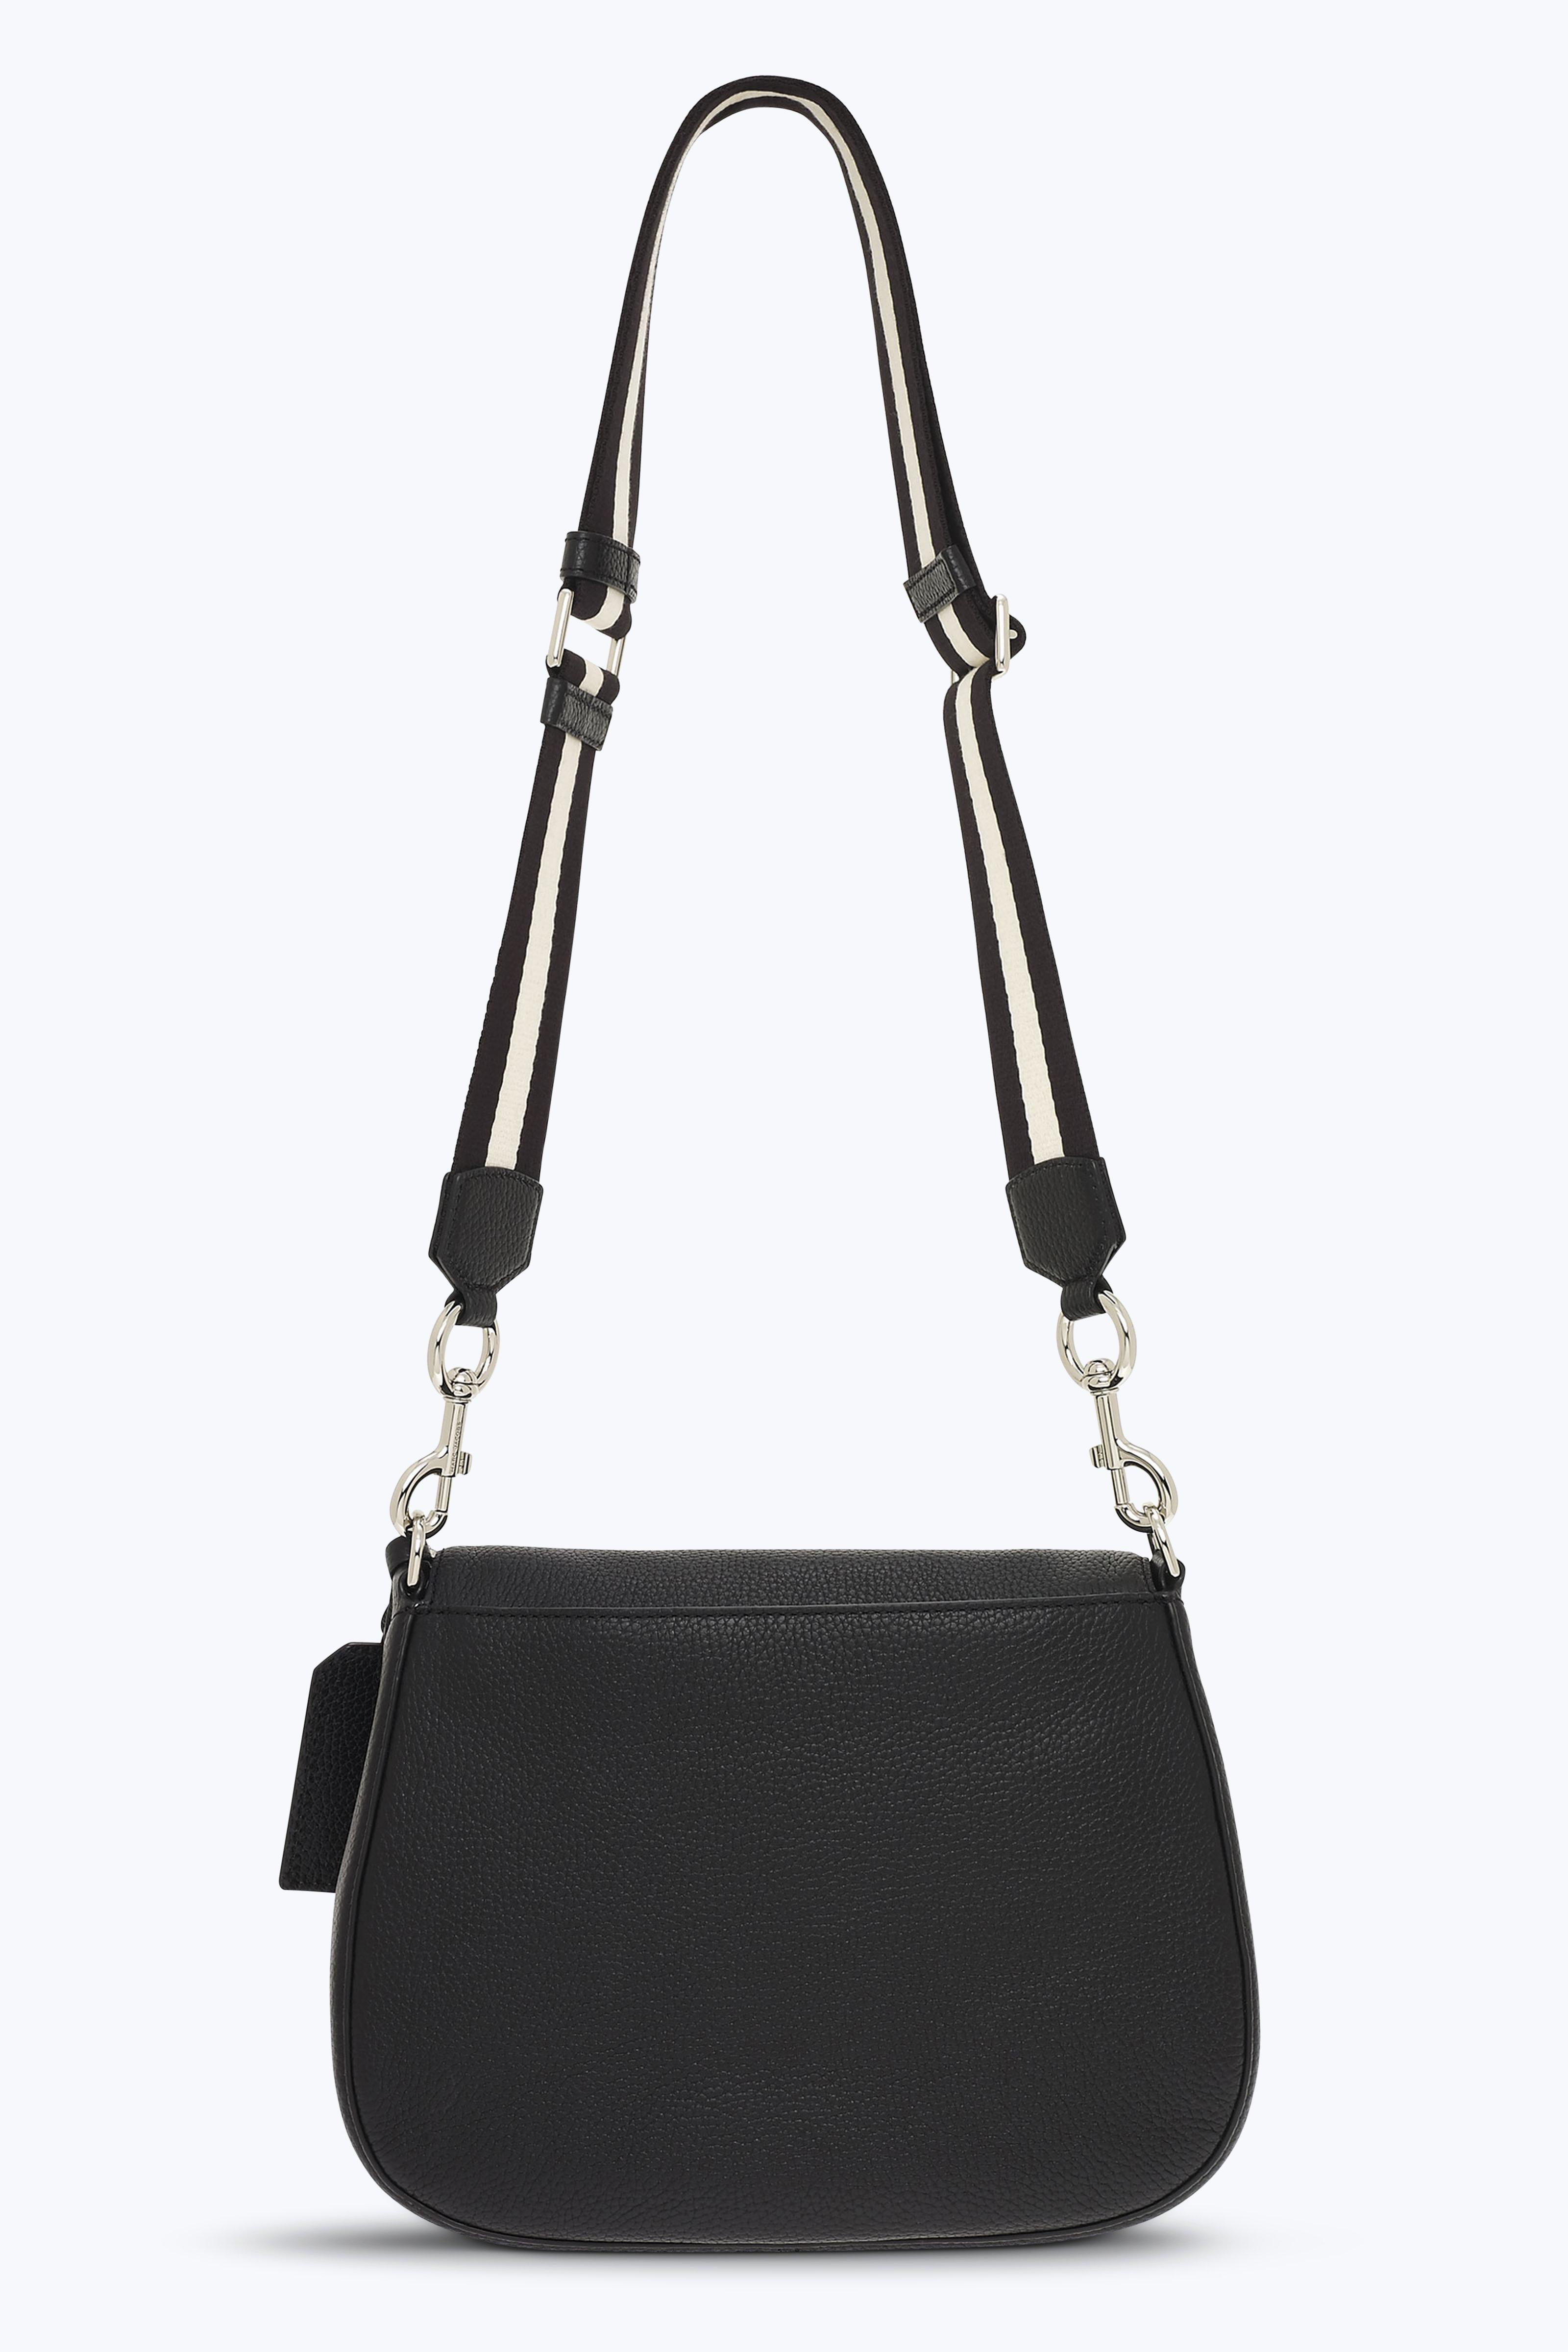 MARC JACOBS Recruit Small Saddle Bag With Guitar Strap in Black | ModeSens